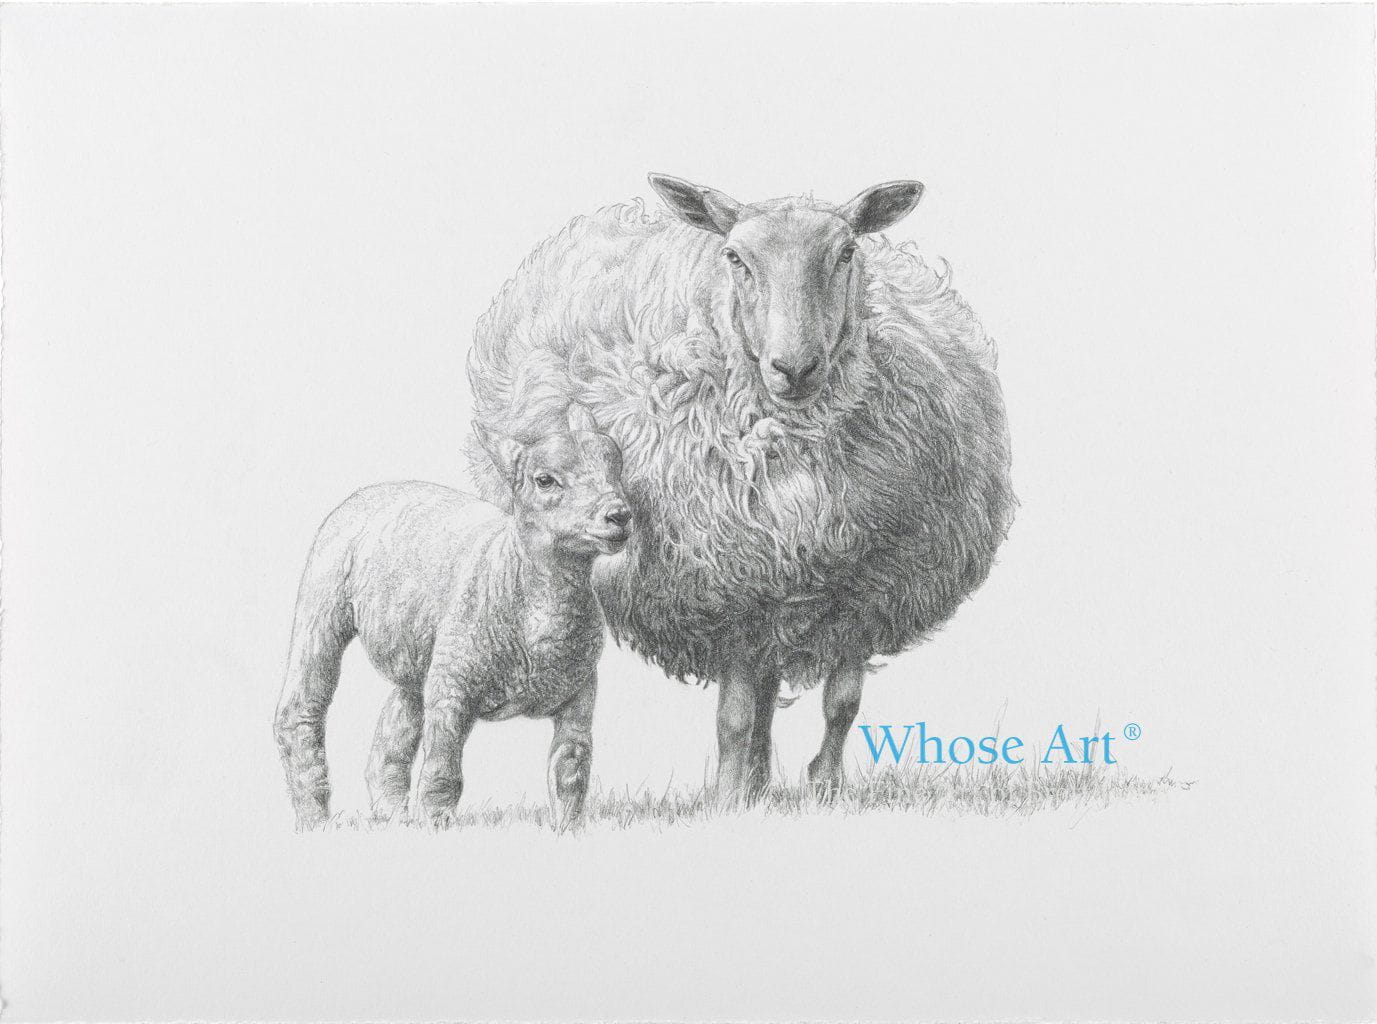 A sheep print showing a black and white pencil drawing of a lamb and a sheep together. Lamb art print in graphite pencil.